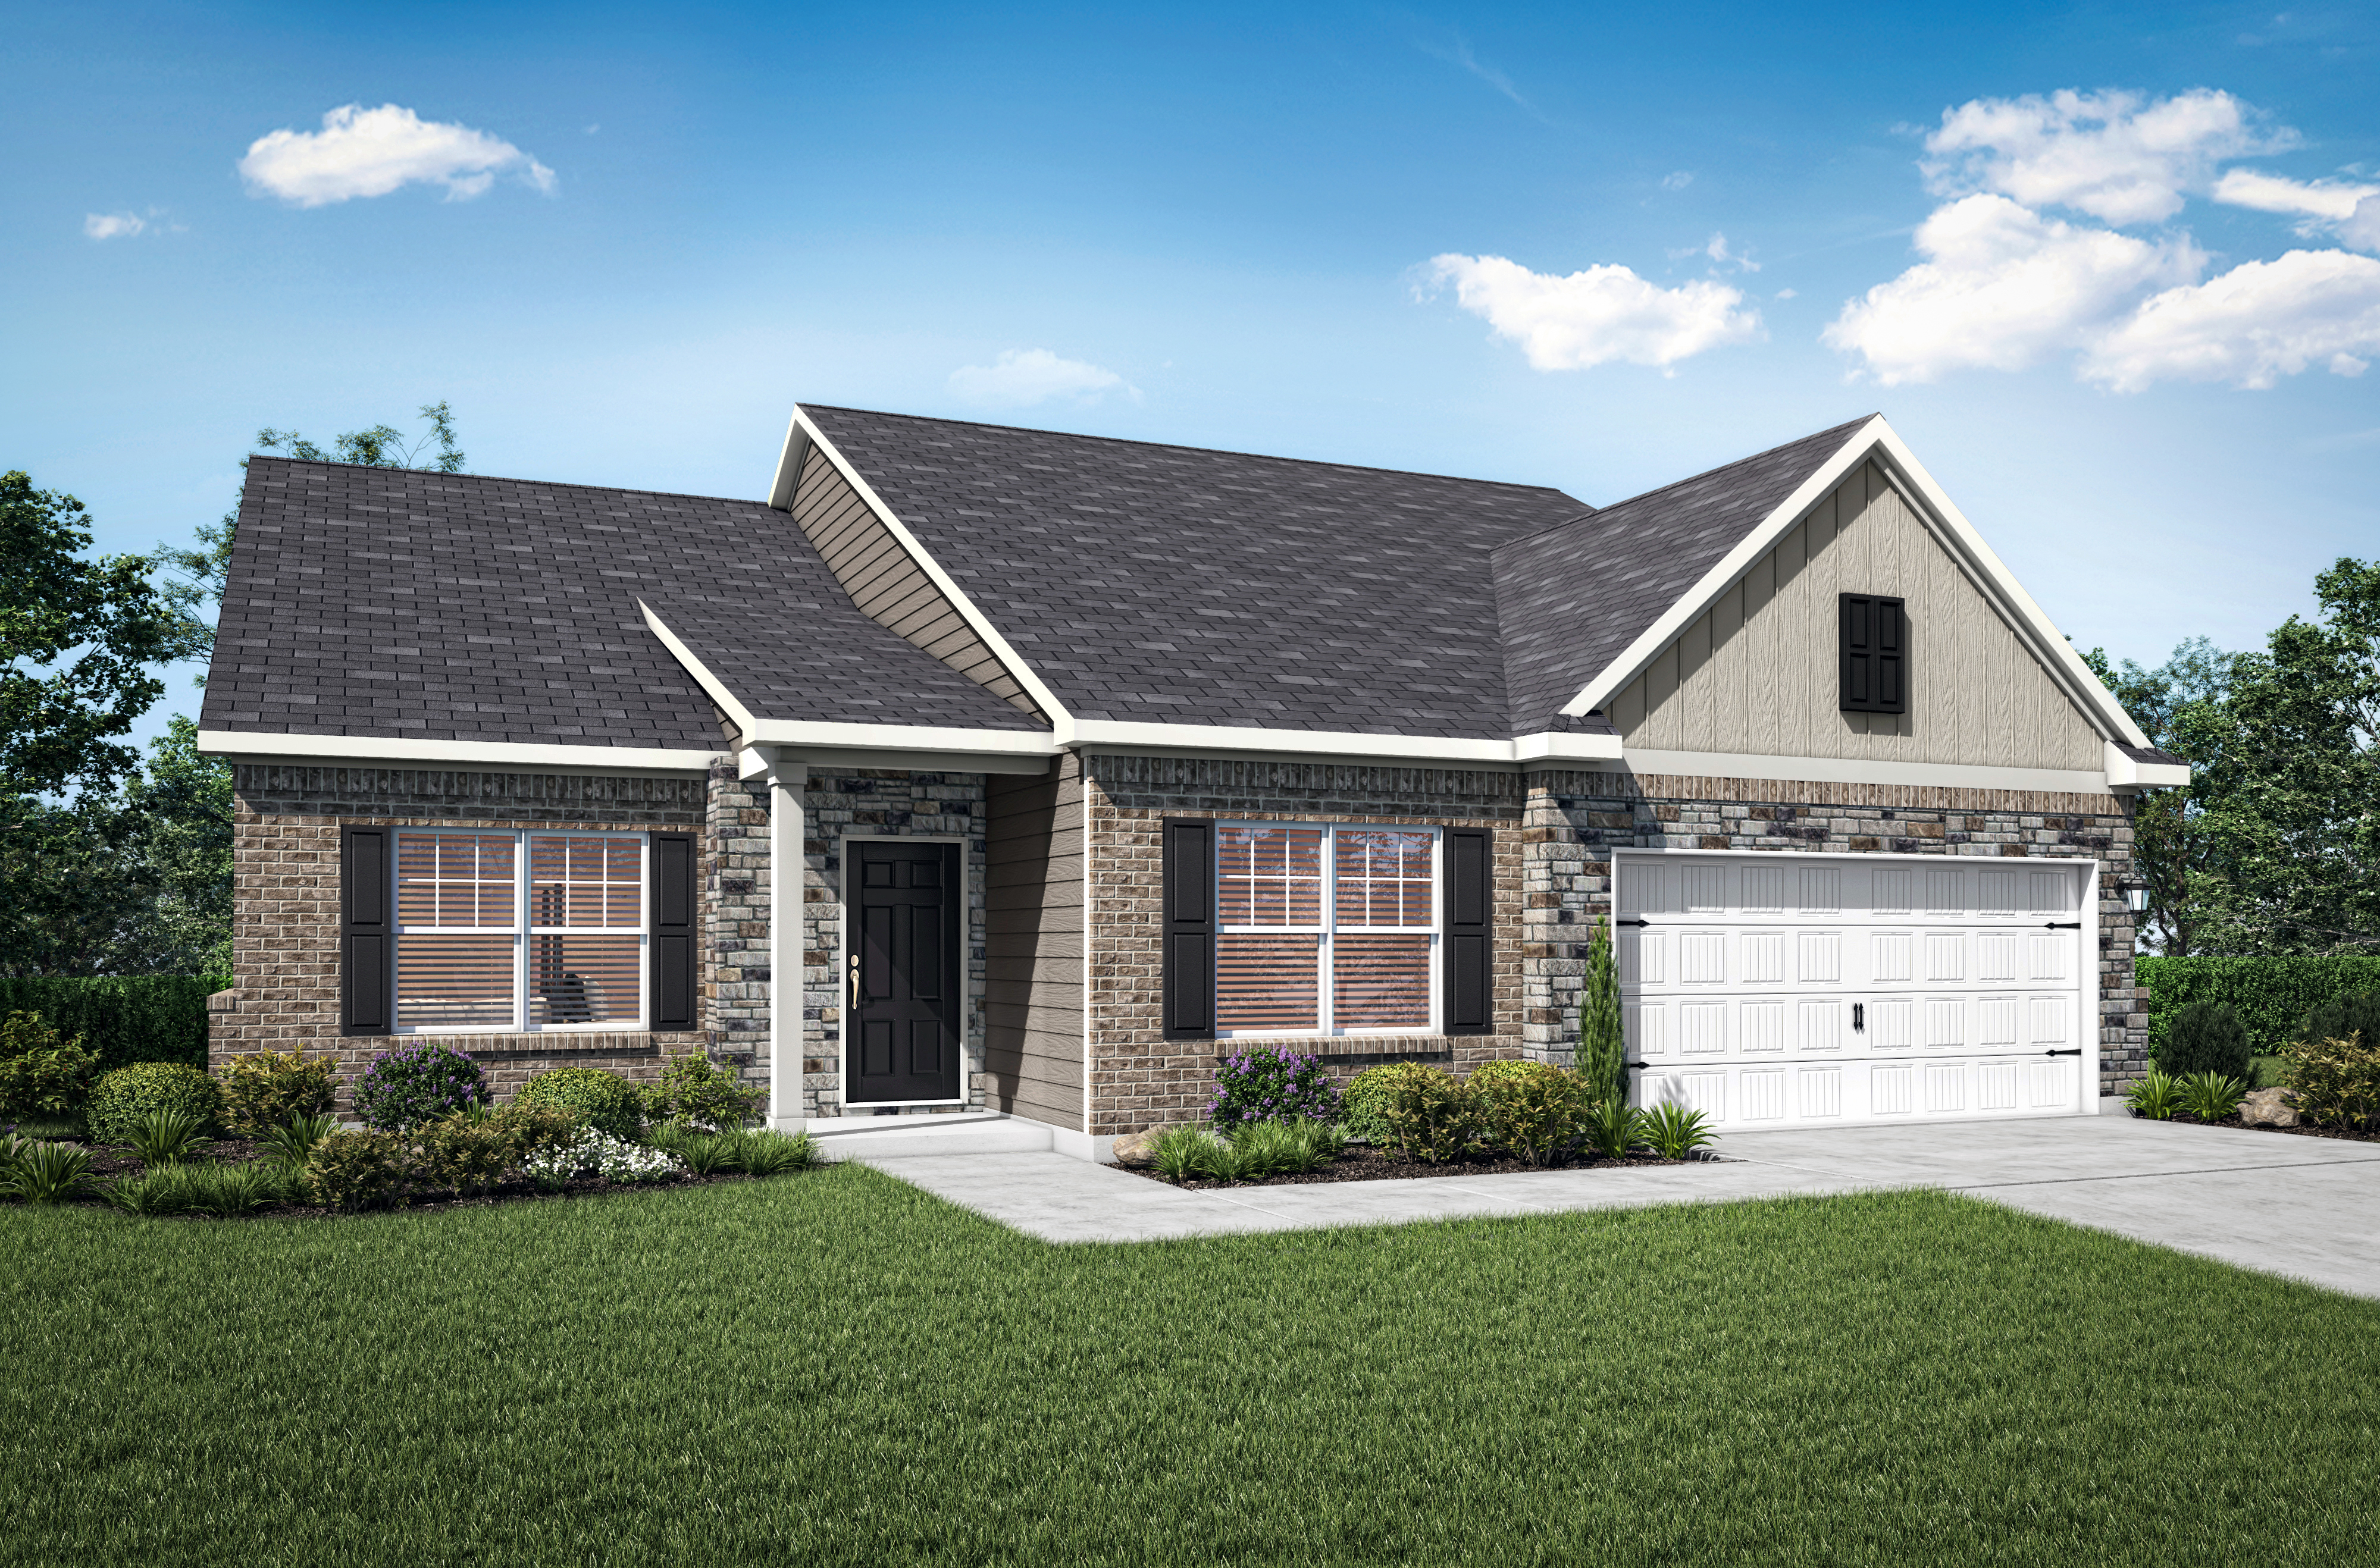 Bew construction homes with three to five bedrooms are now available at Hunter&#039;s Point at Innsbrooke by LGI Homes.